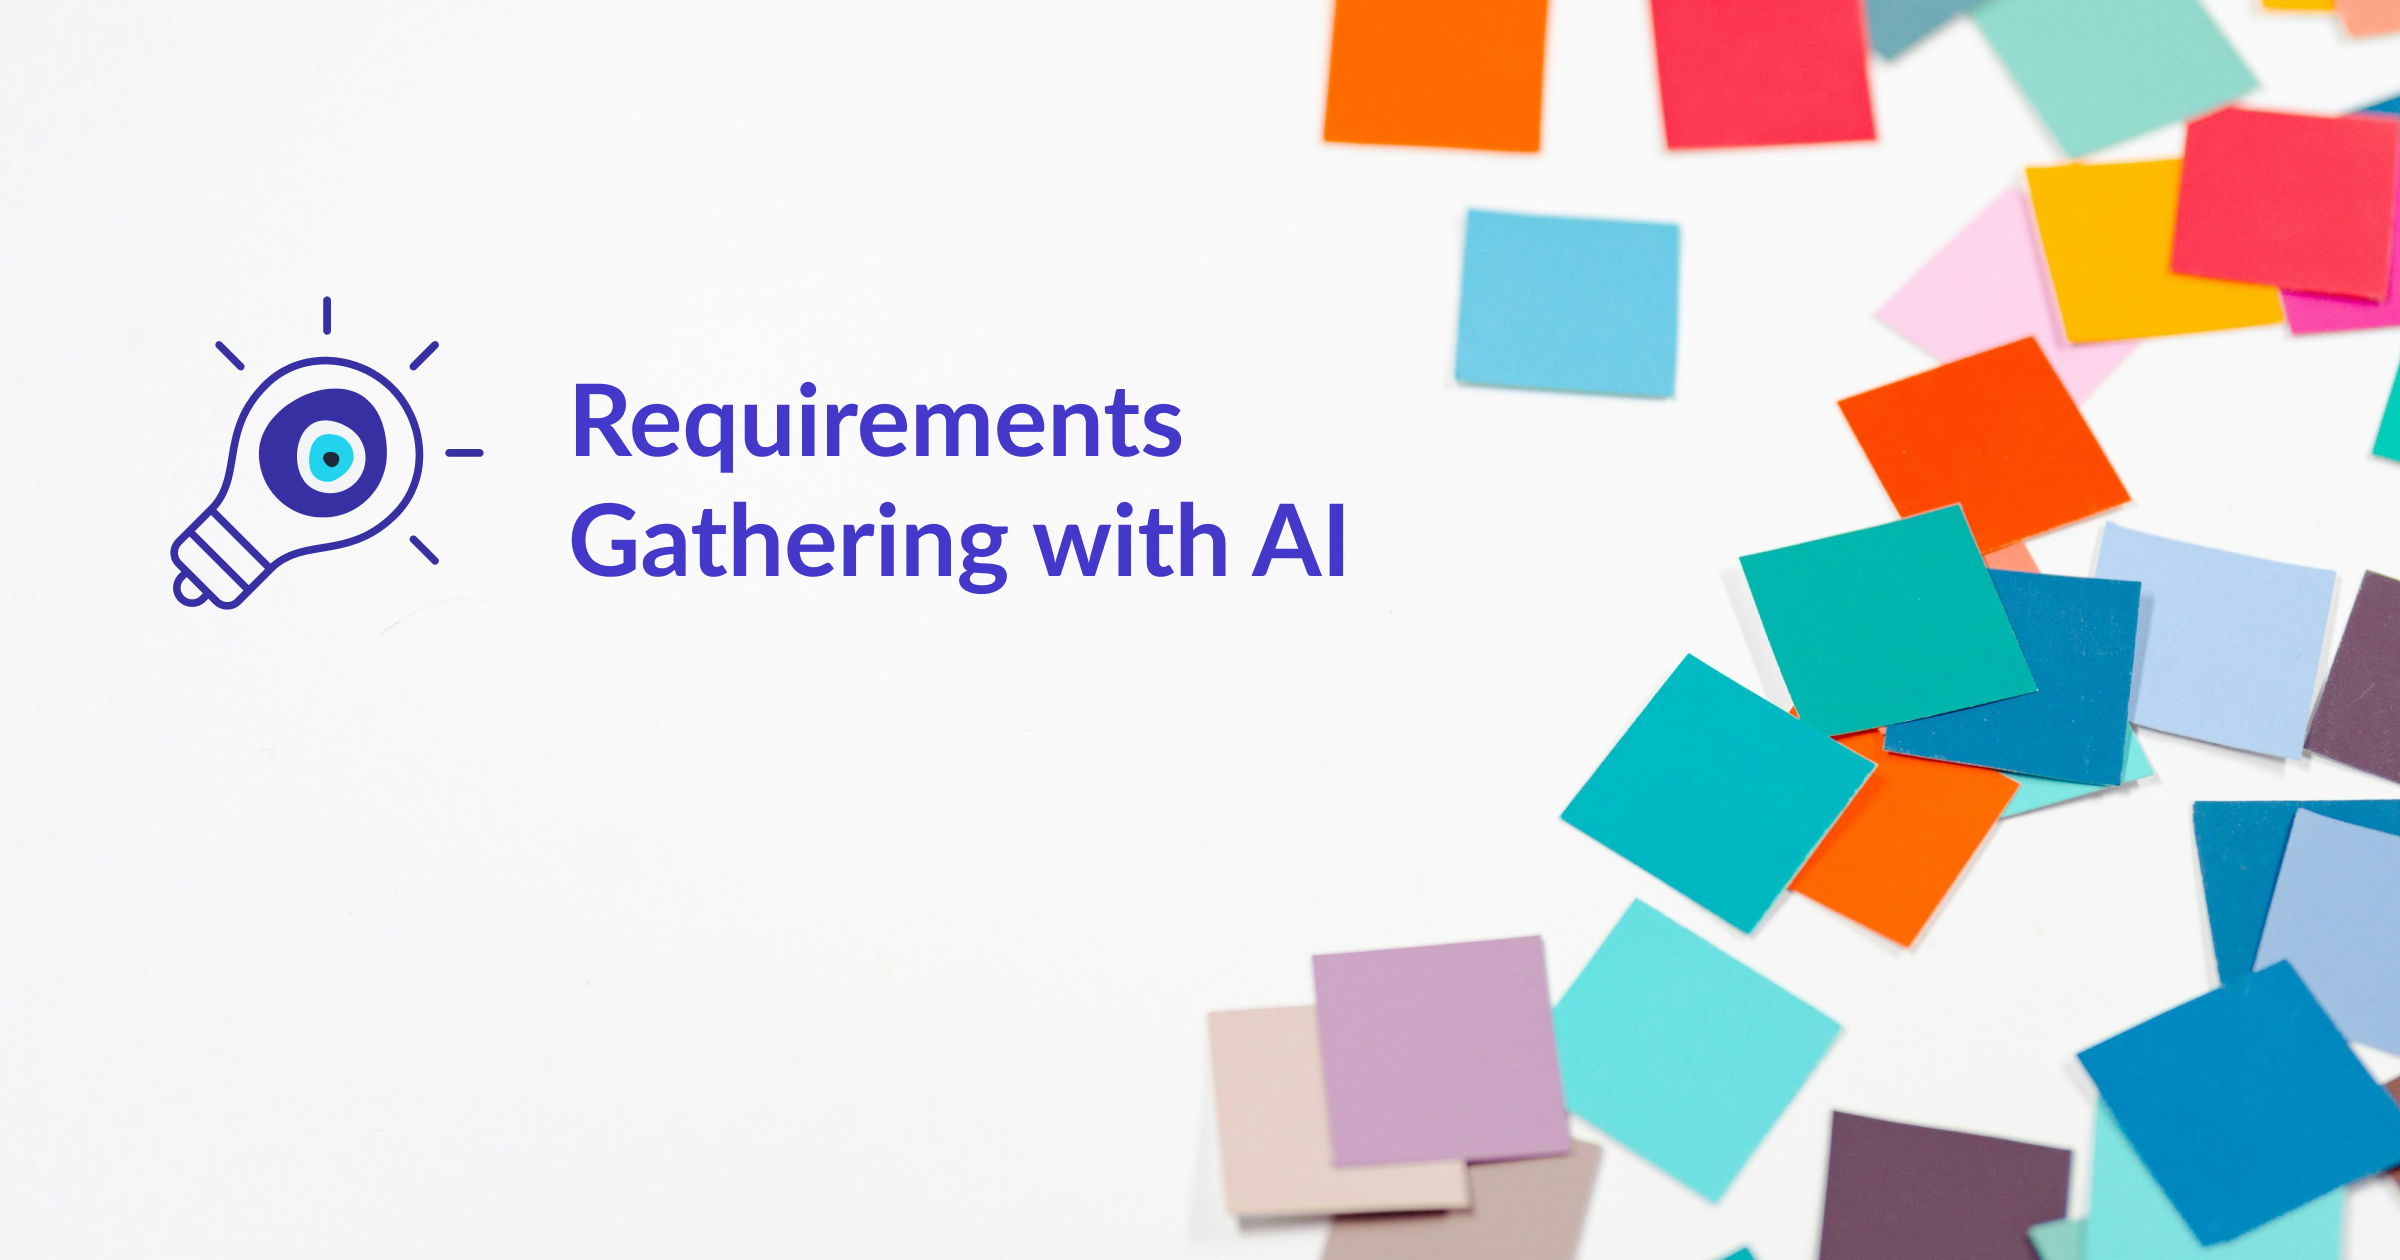 Text saying "Requirements gathering with AI" and image of multi-colored post its